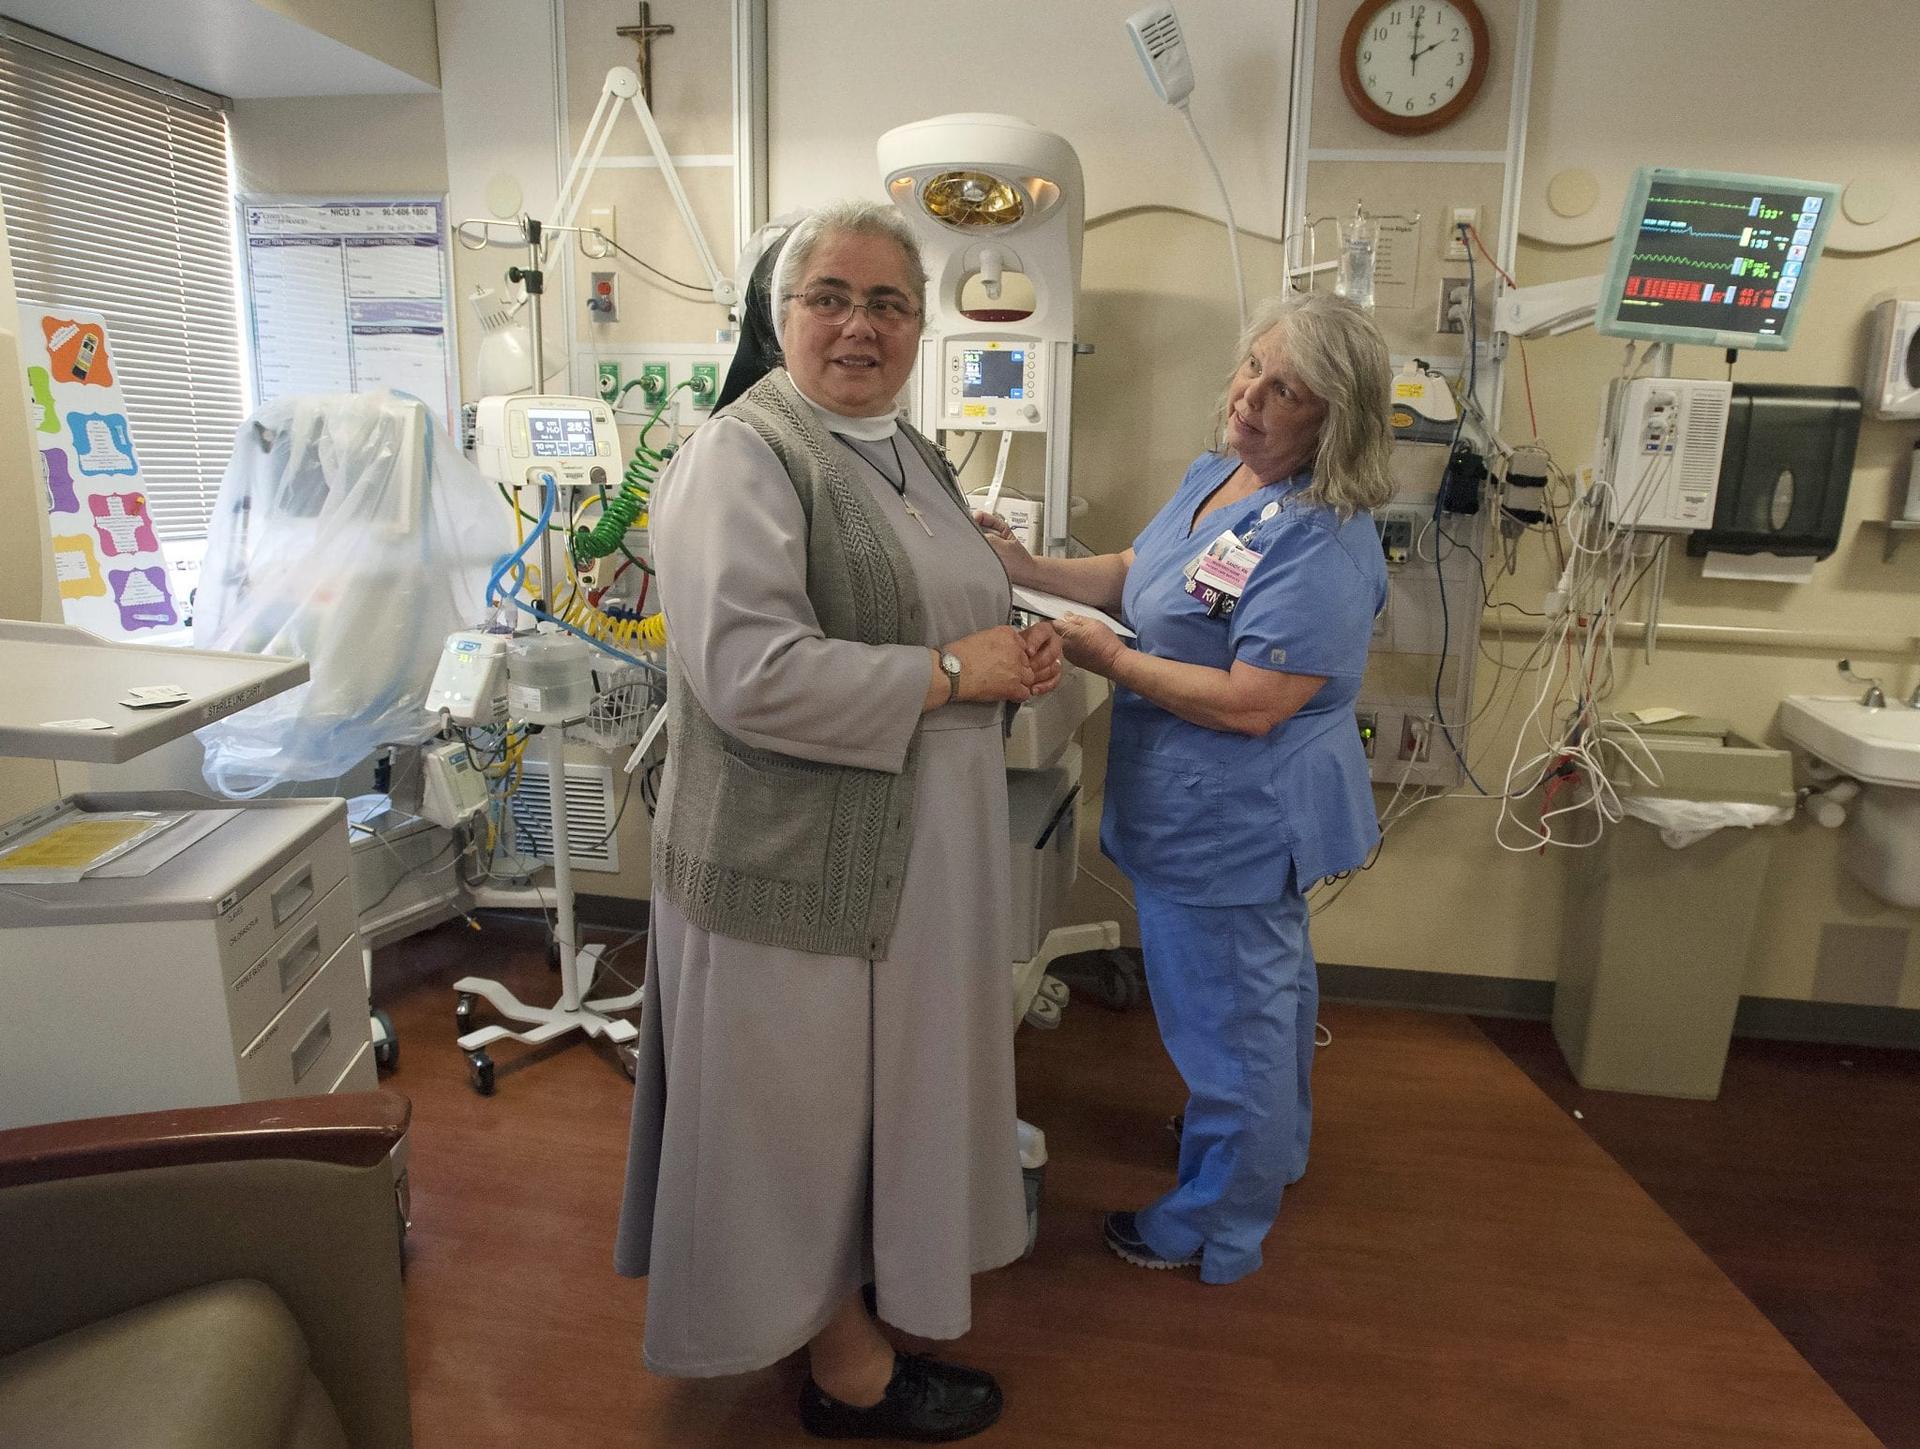 Catholic nun offers love, support at Texas hospital